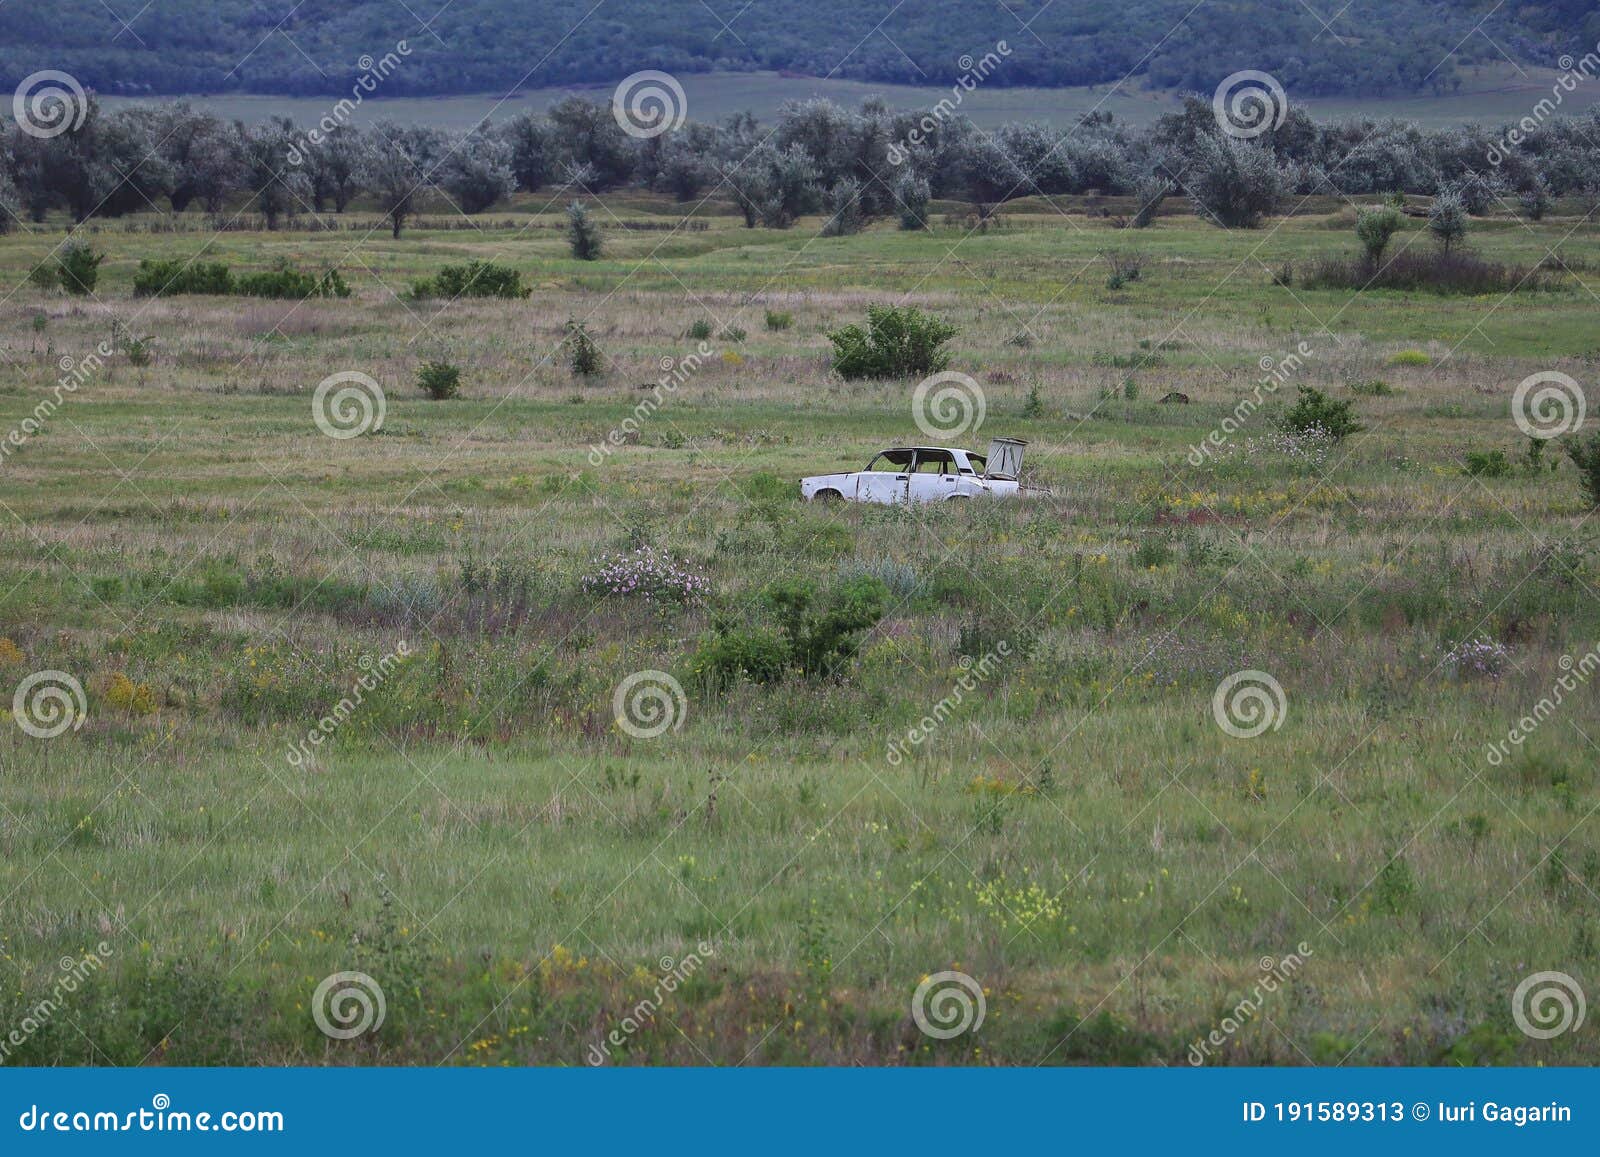 military range for target shooting, body from a former car in an open field